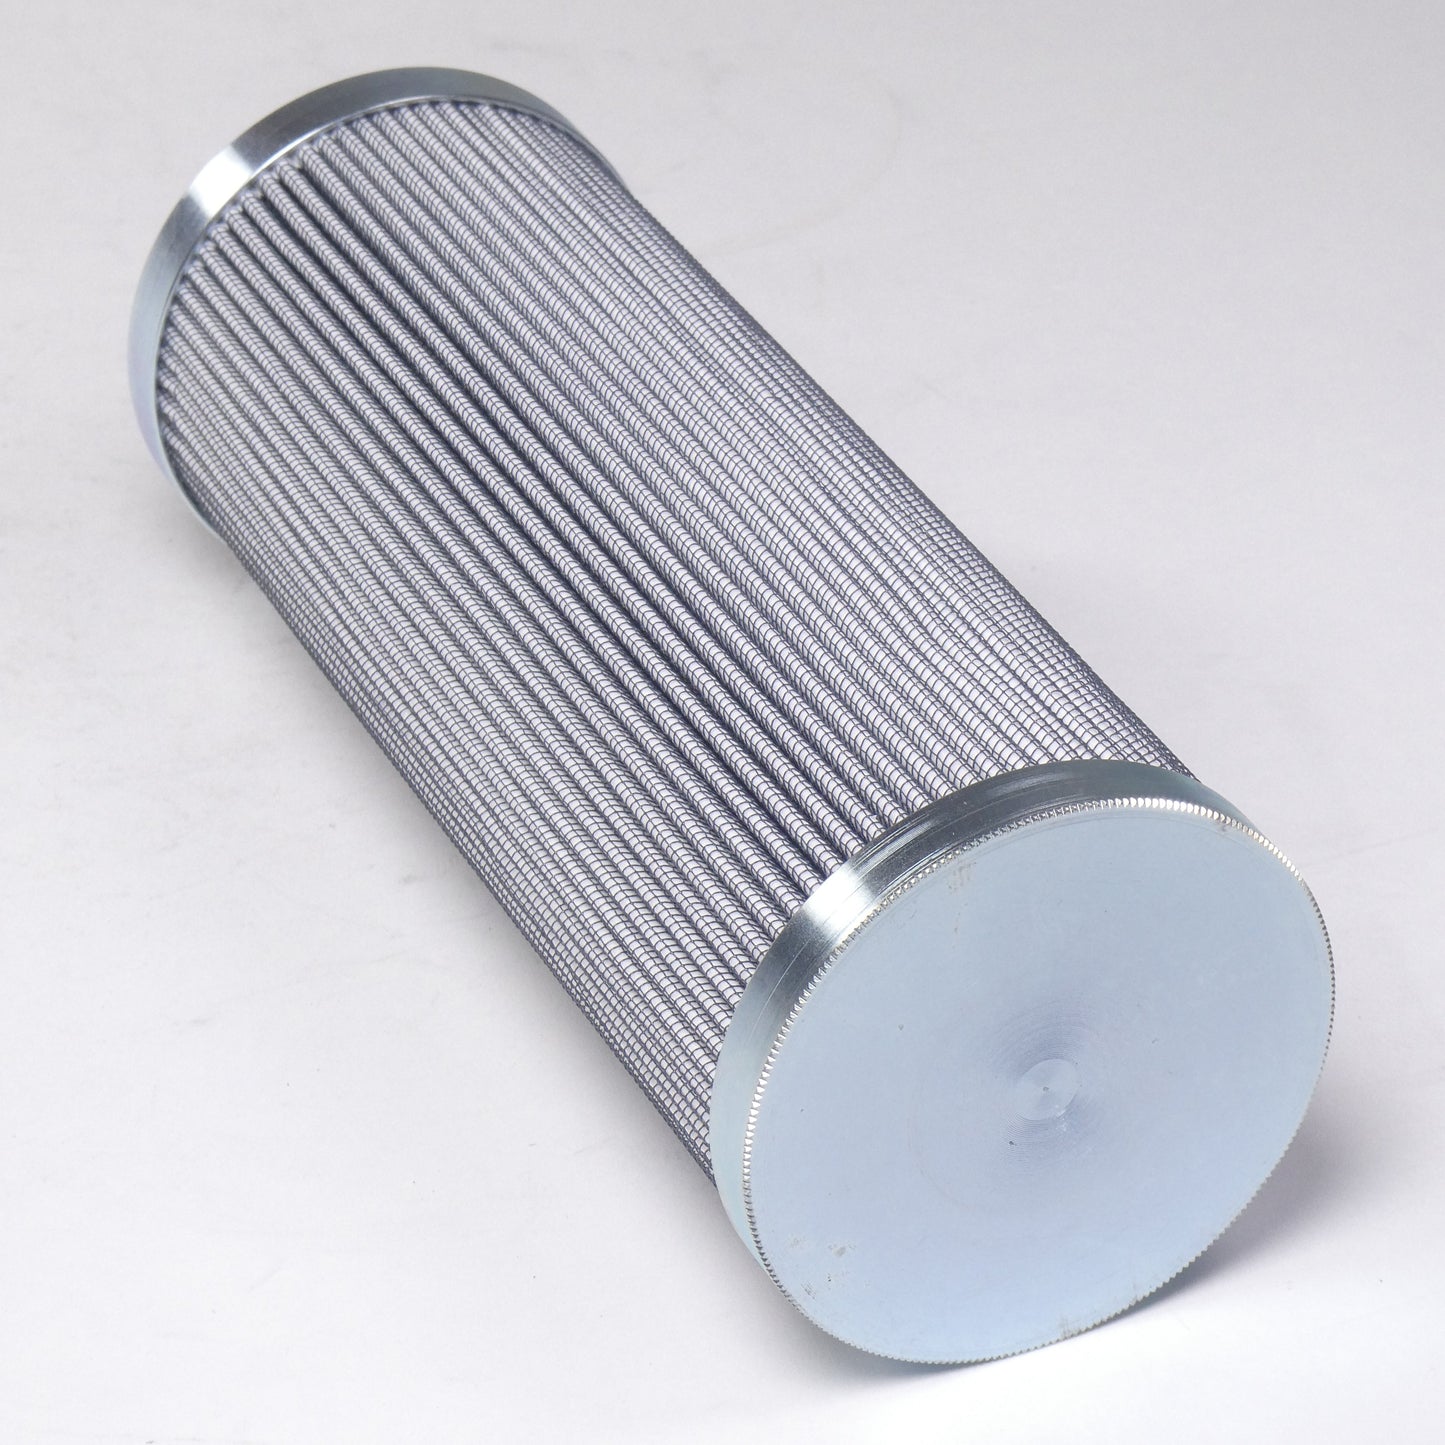 Hydrafil Replacement Filter Element for Commercial C927173